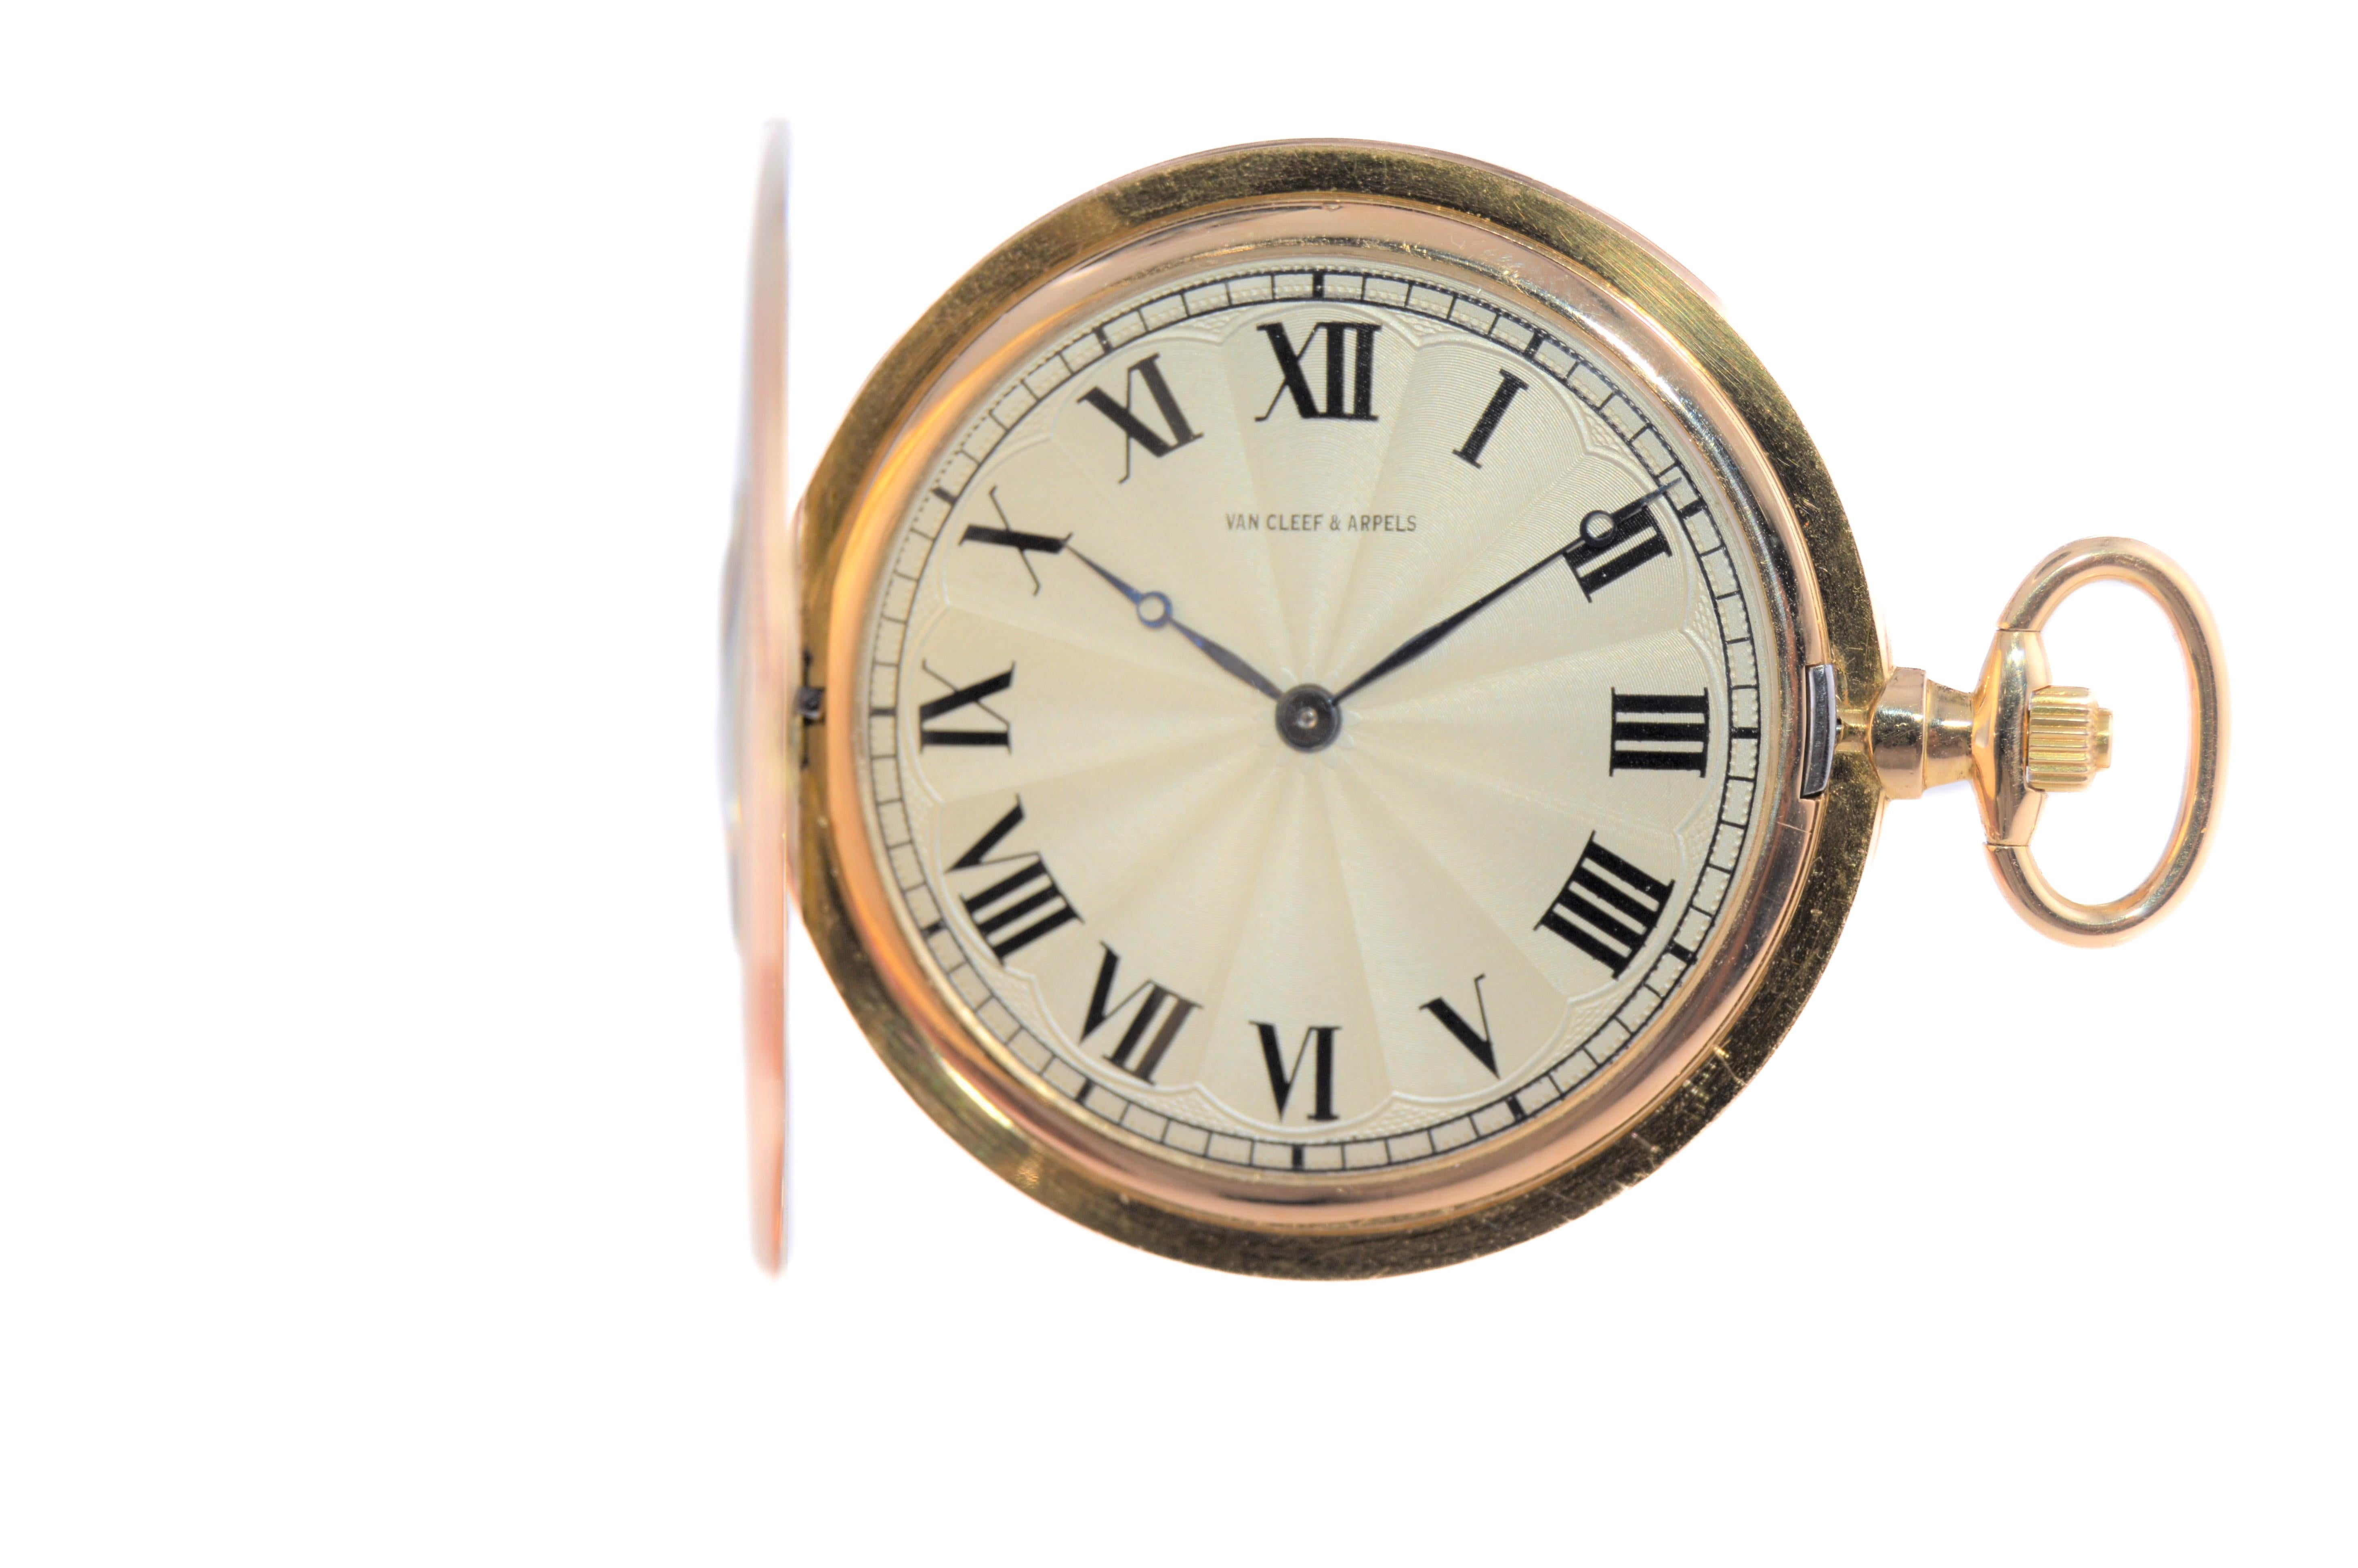 FACTORY / HOUSE: Van Cleef & Arpels 
STYLE / REFERENCE: 1/2 Hunter Pocket Watch / Ultra Thin
METAL / MATERIAL: 18Kt. Yellow Gold
CIRCA / YEAR: 1930's
DIMENSIONS / SIZE: Diameter 54mm
MOVEMENT / CALIBER: Manual Winding / 17 Jewels 
DIAL / HANDS: